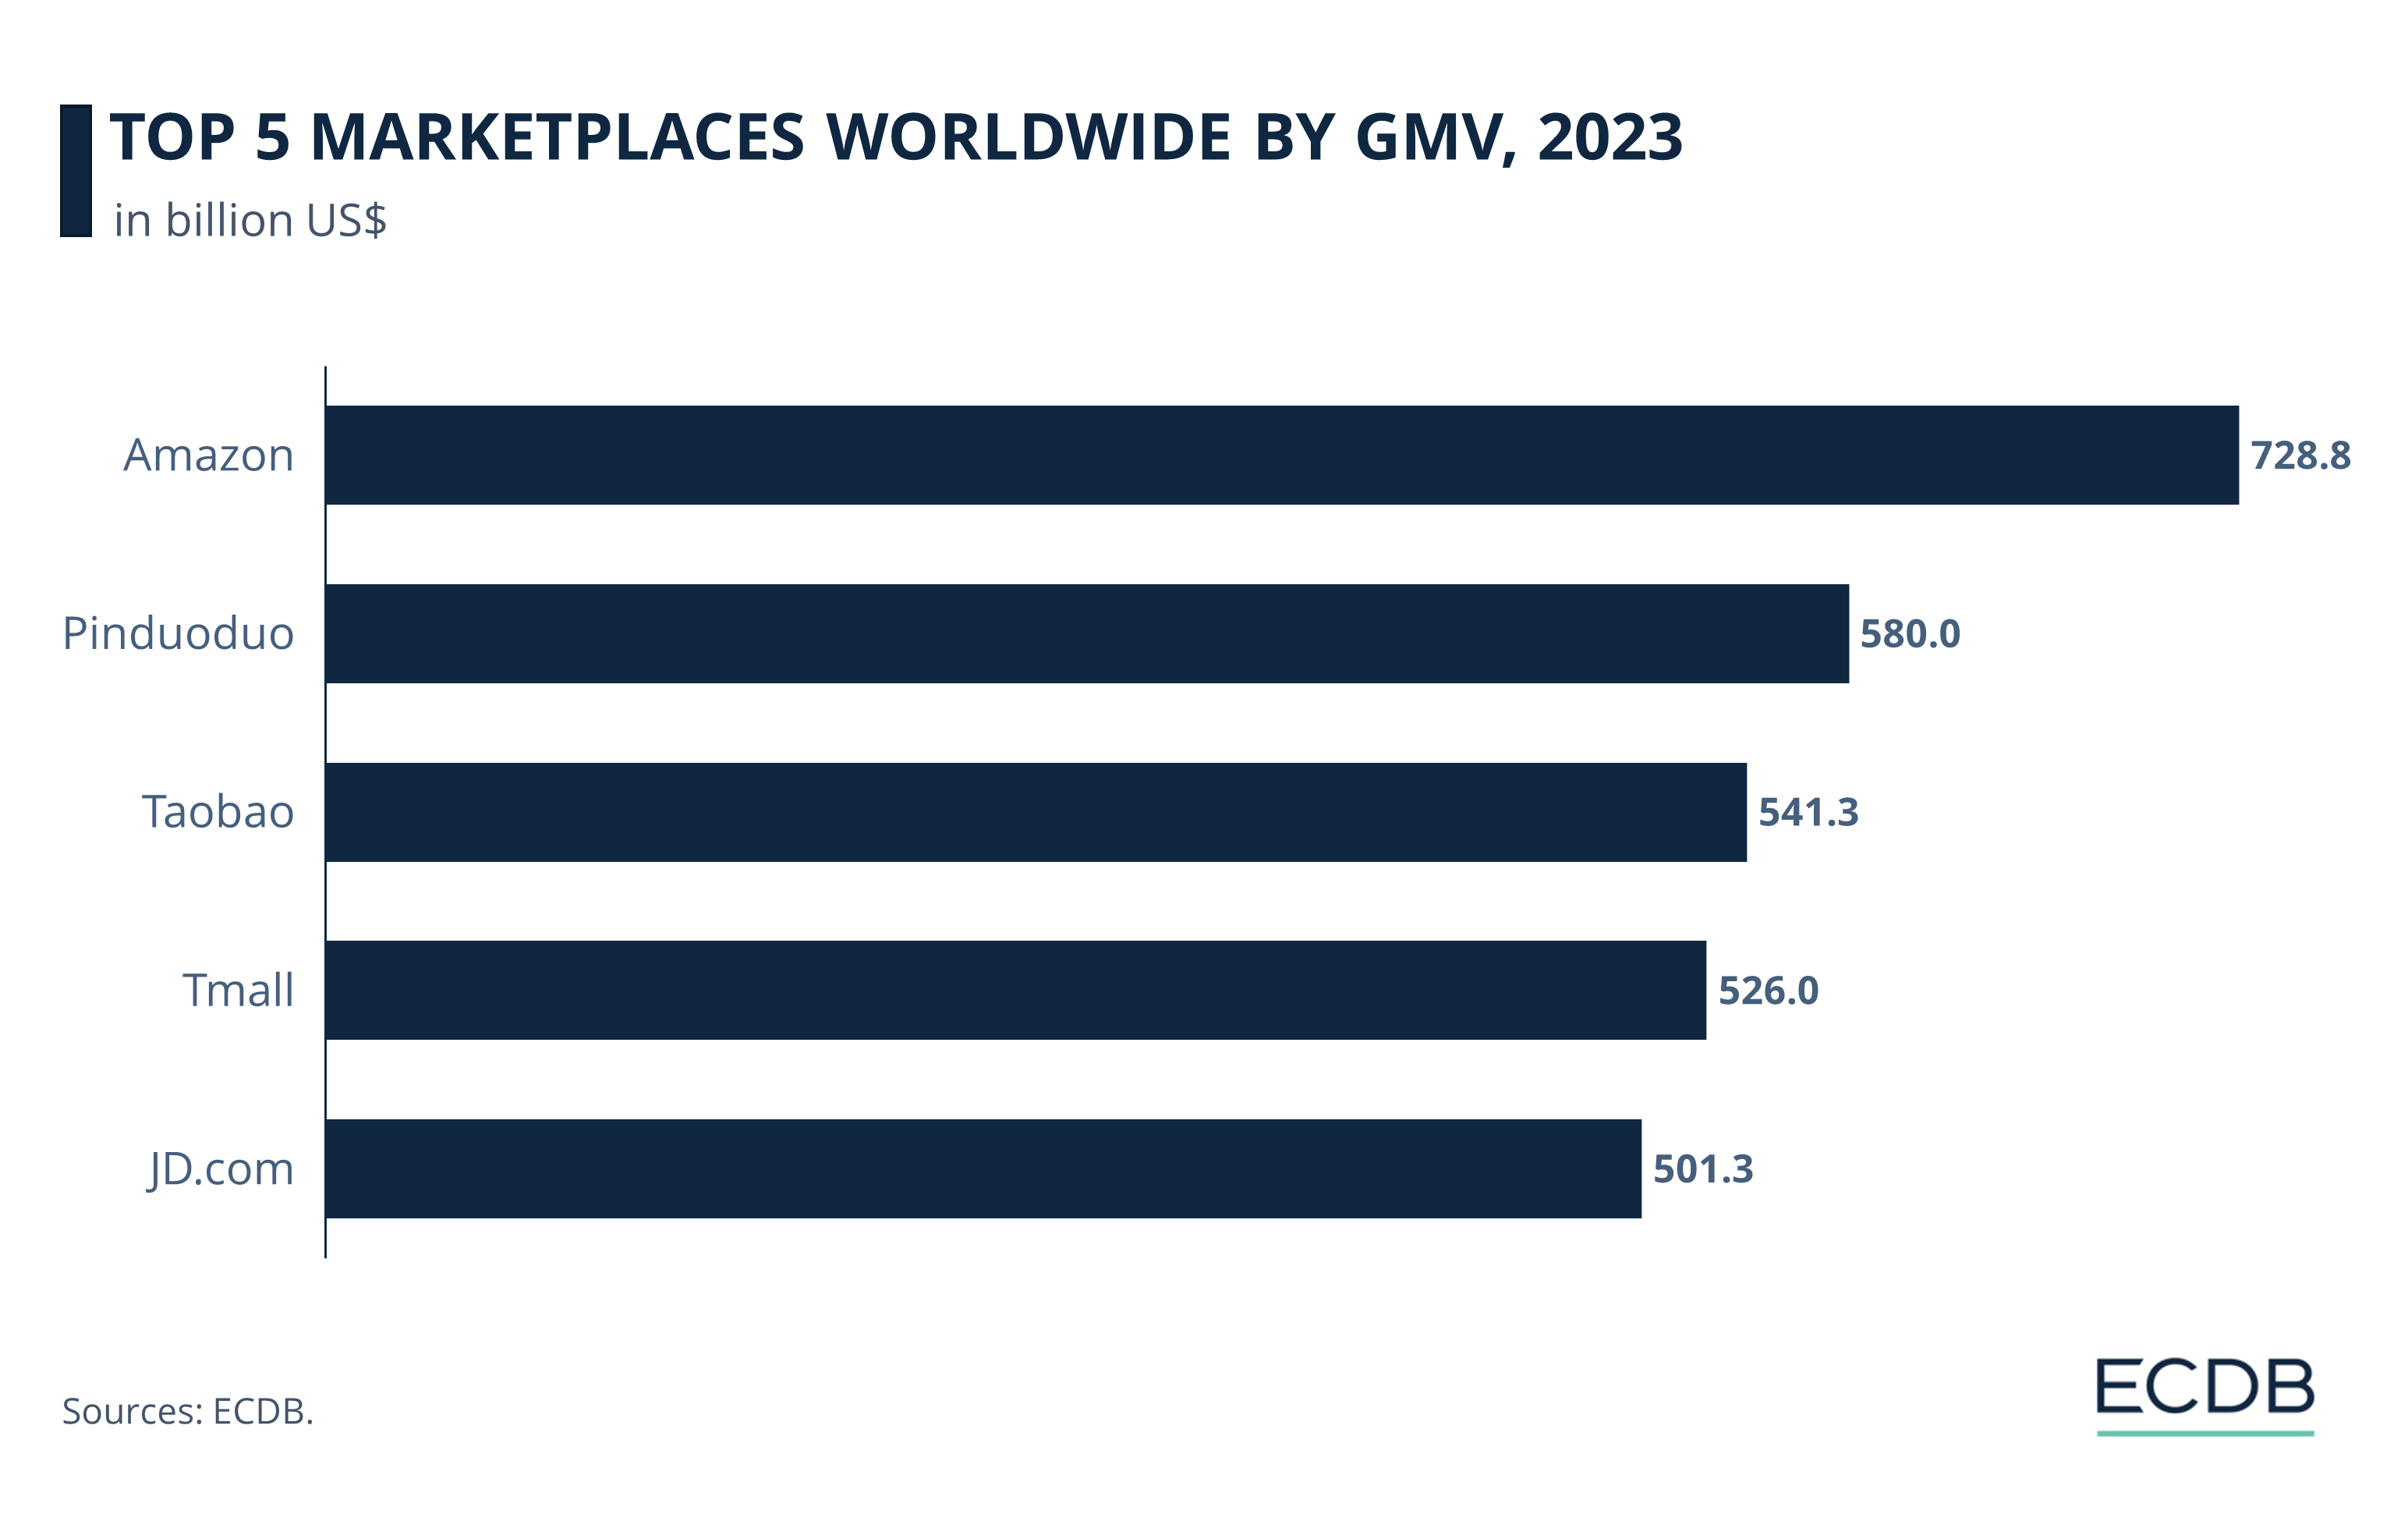 Top 5 Marketplaces Worldwide by GMV, 2023